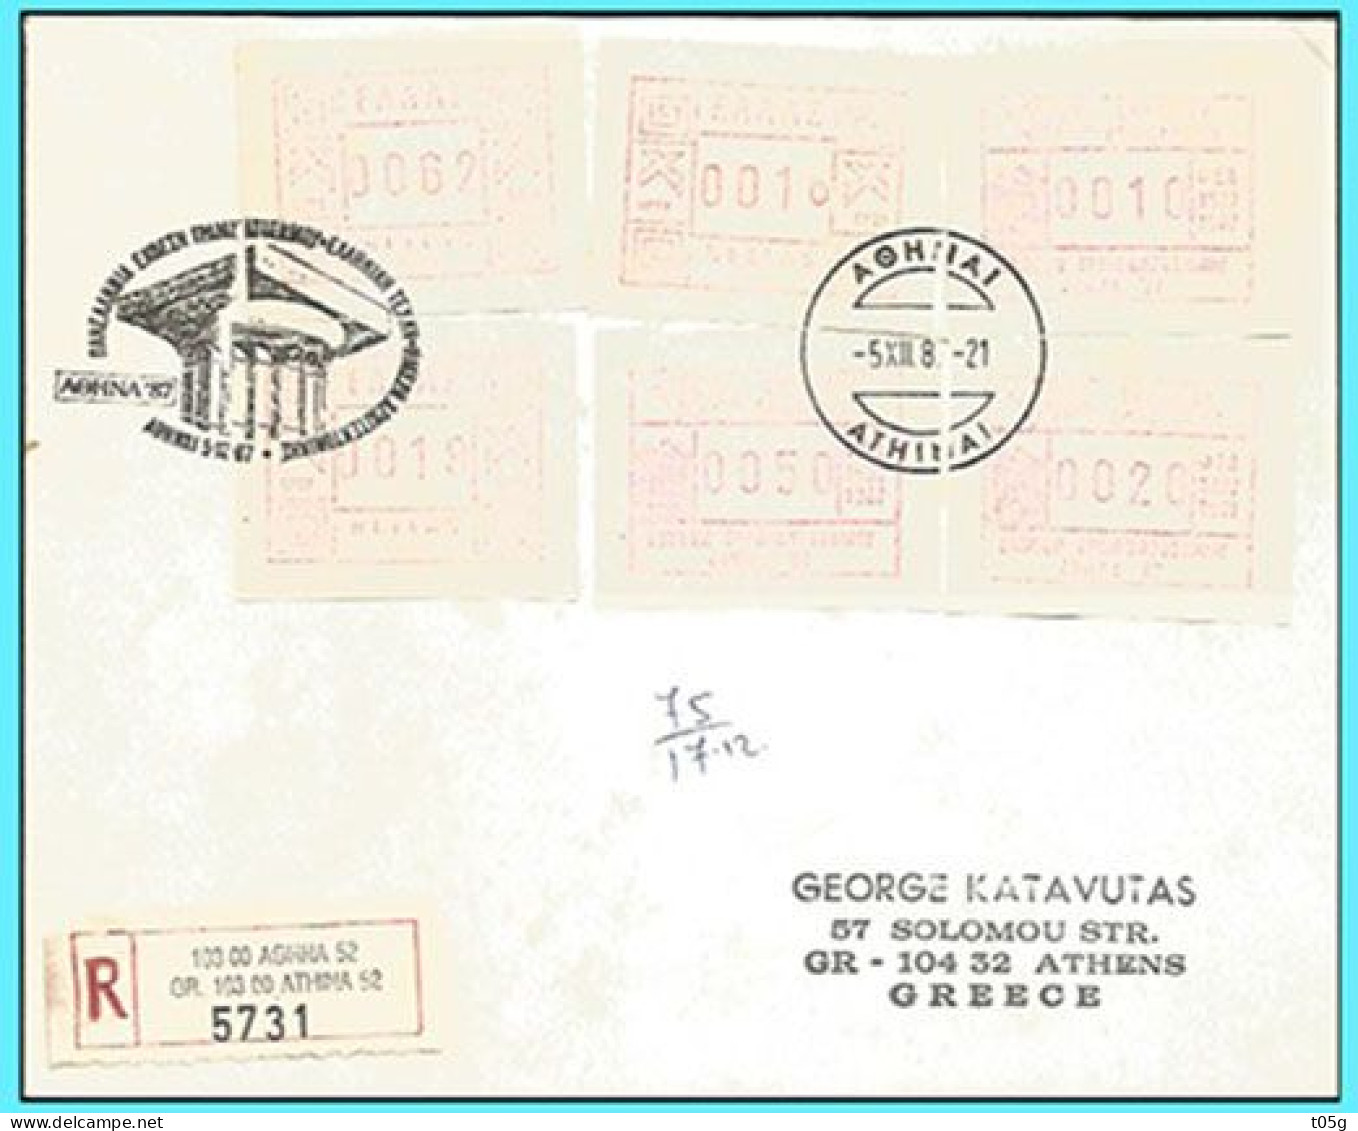 GREECE- GRECE- HELLAS 1987: Register. Canc. (ΑΘΗΝΑΙ 5-ΧΙΙ-88 ΑΘΗΝΑΙ) The Value Of The Stamp FRAMA Is In Drx - FDC